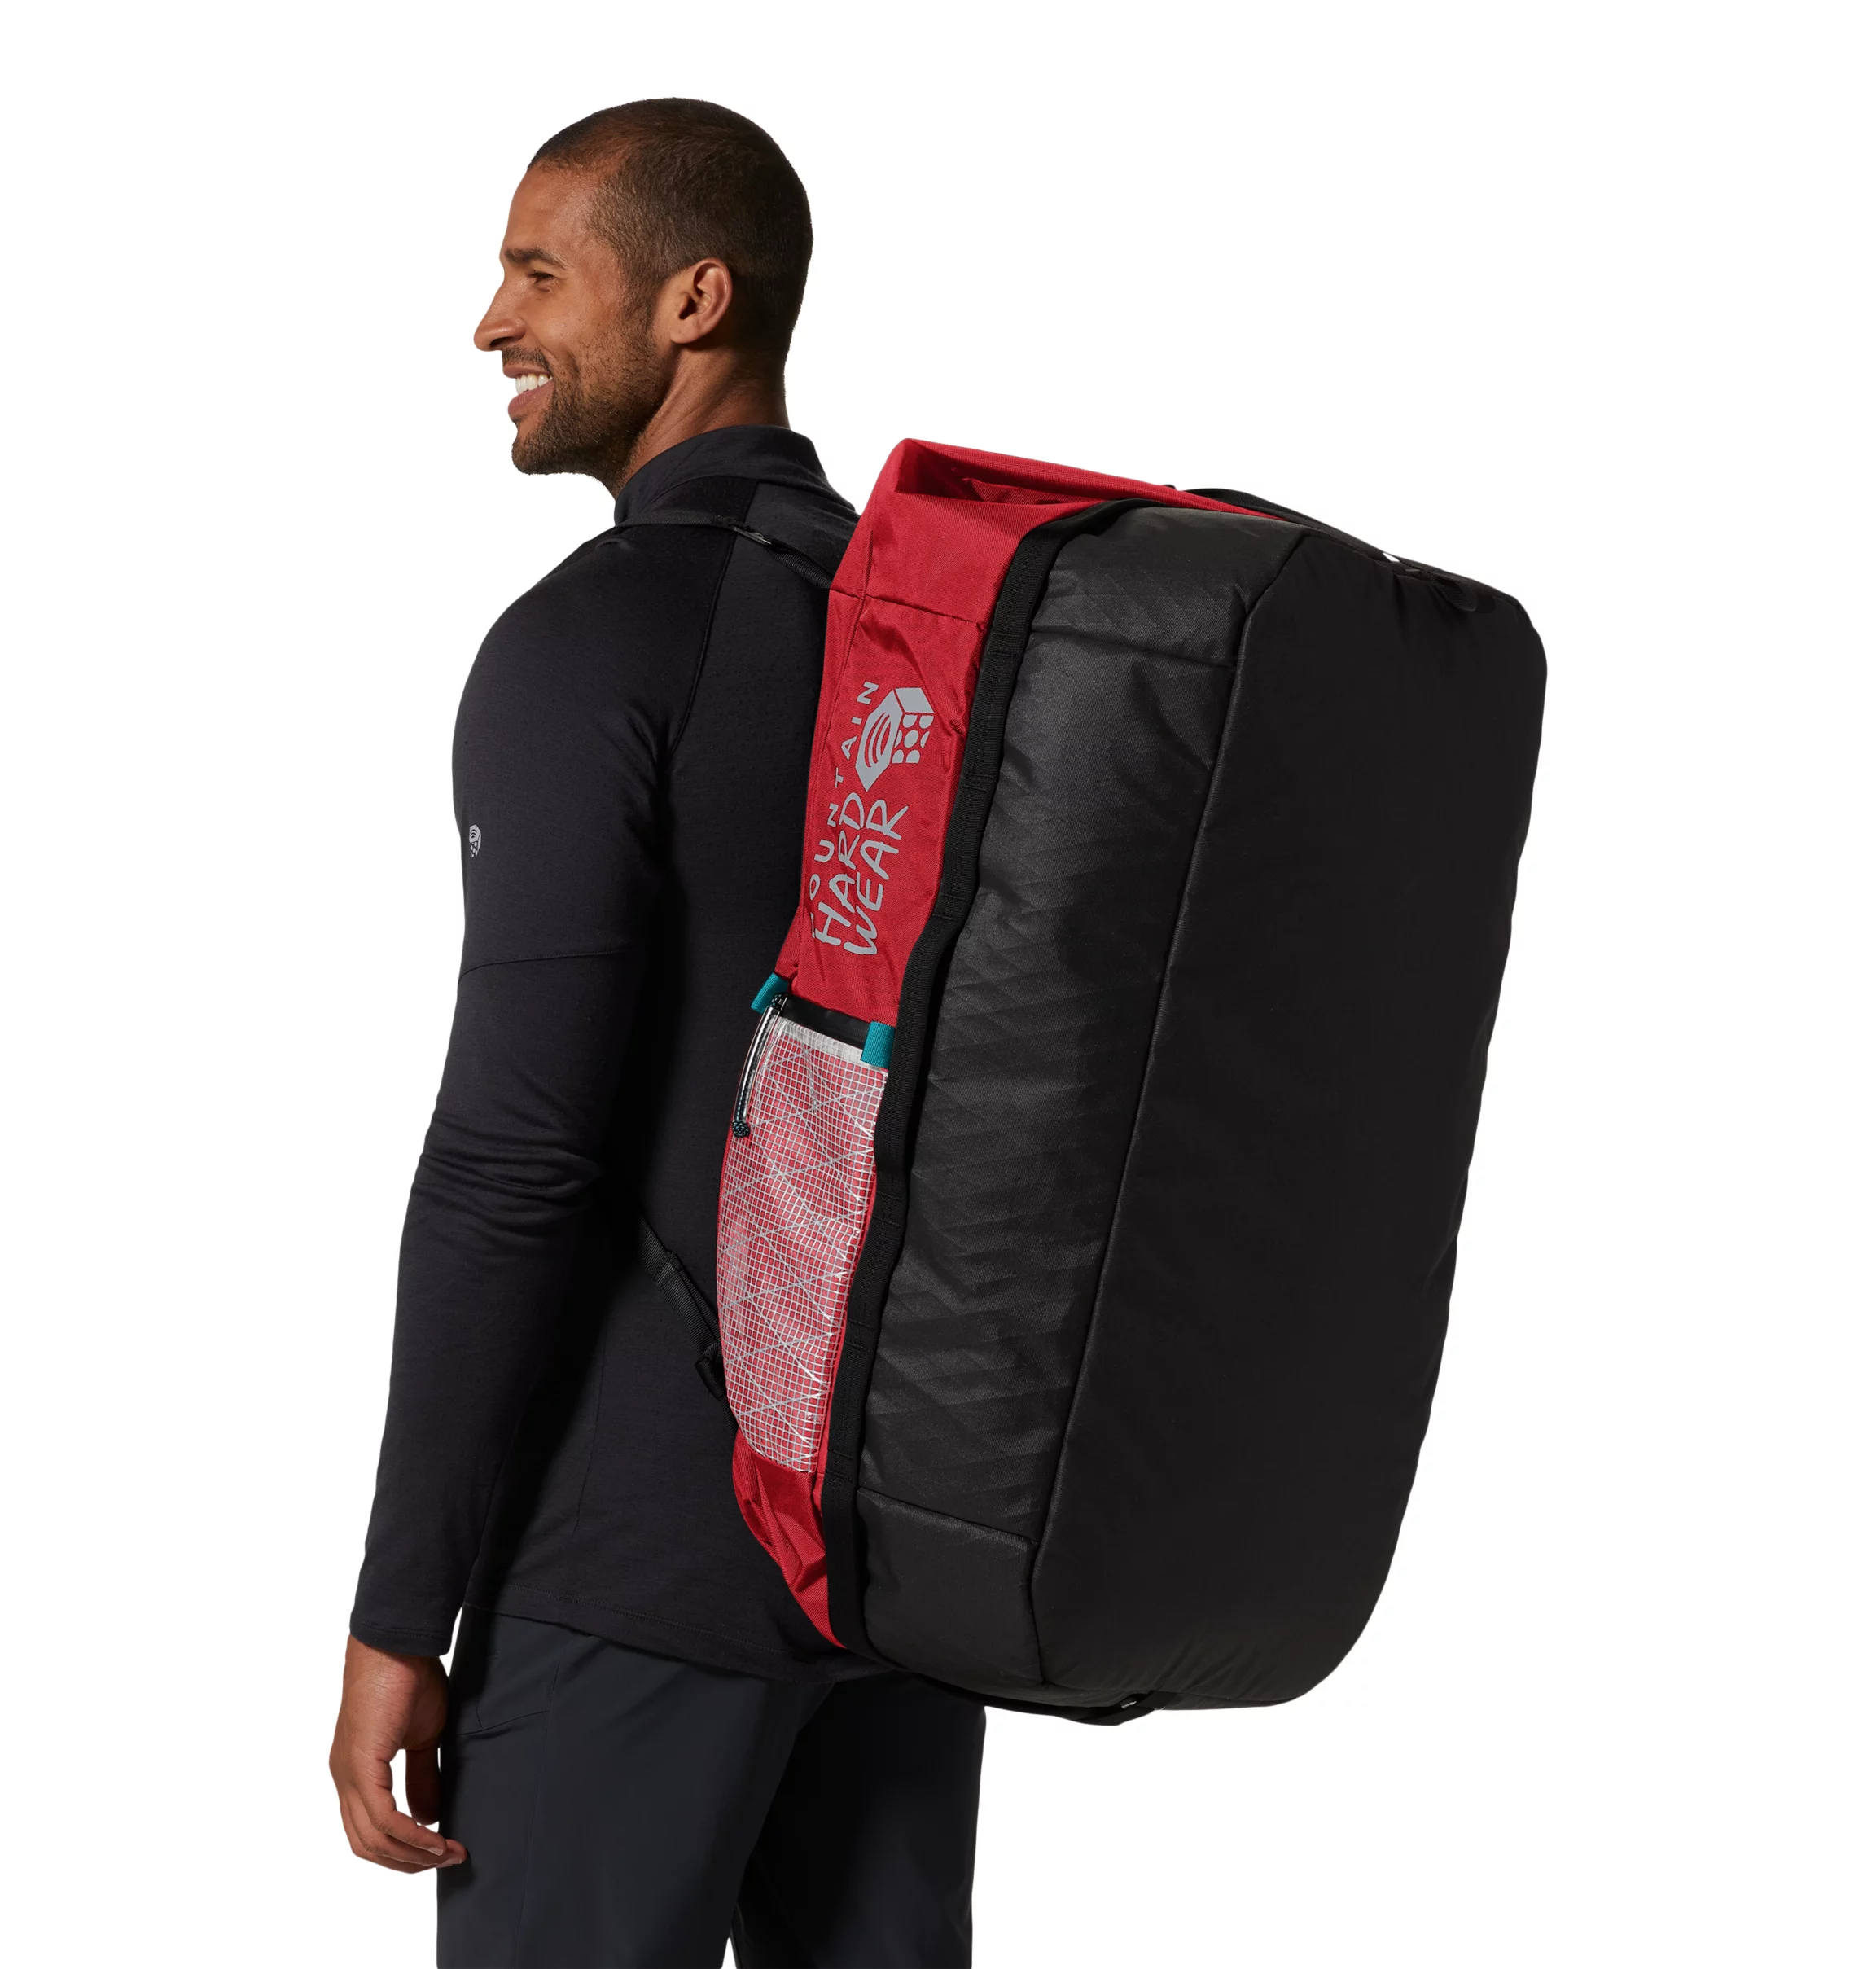 Expedition™ Duffel 100